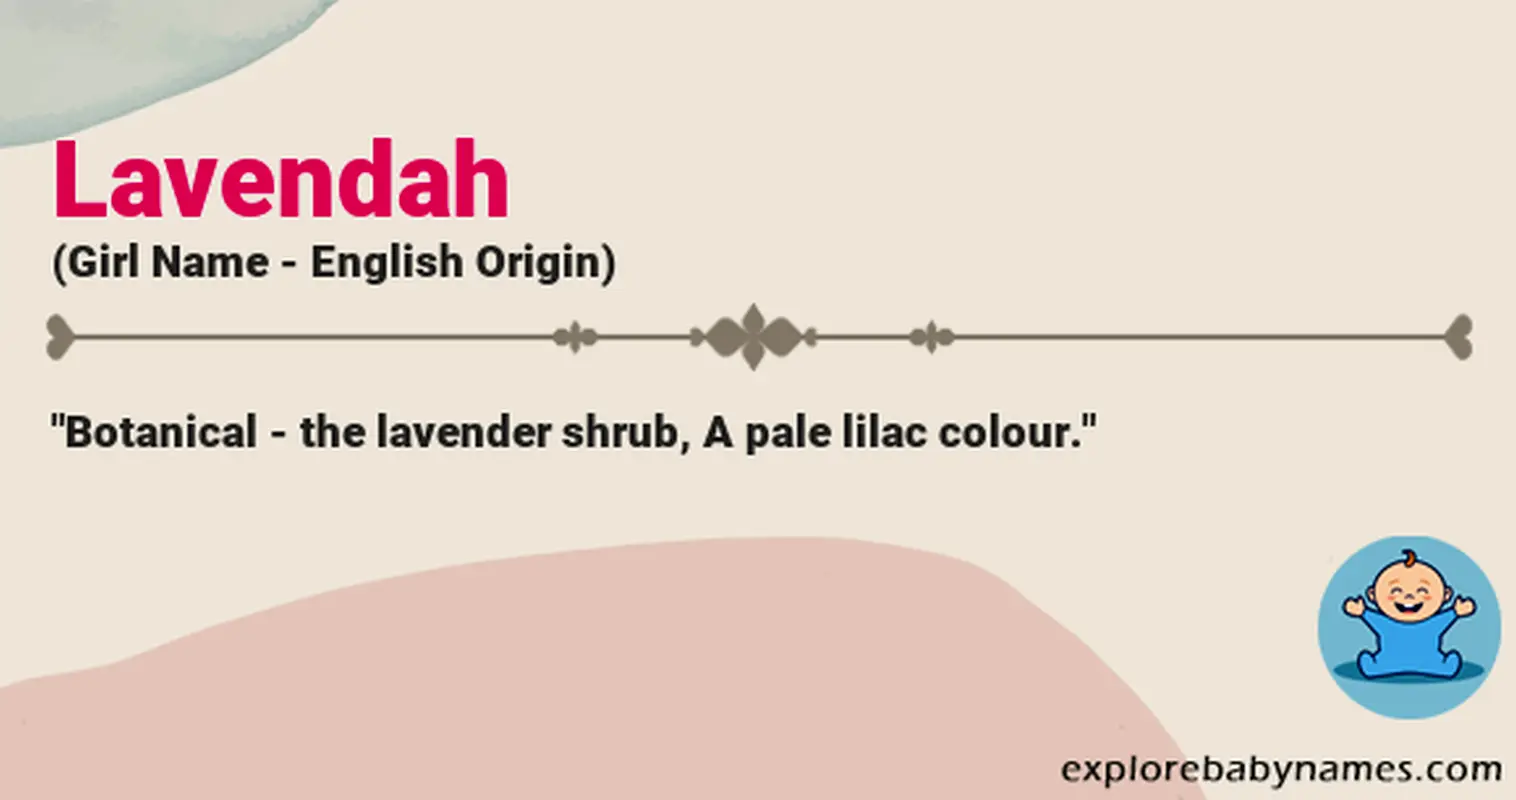 Meaning of Lavendah